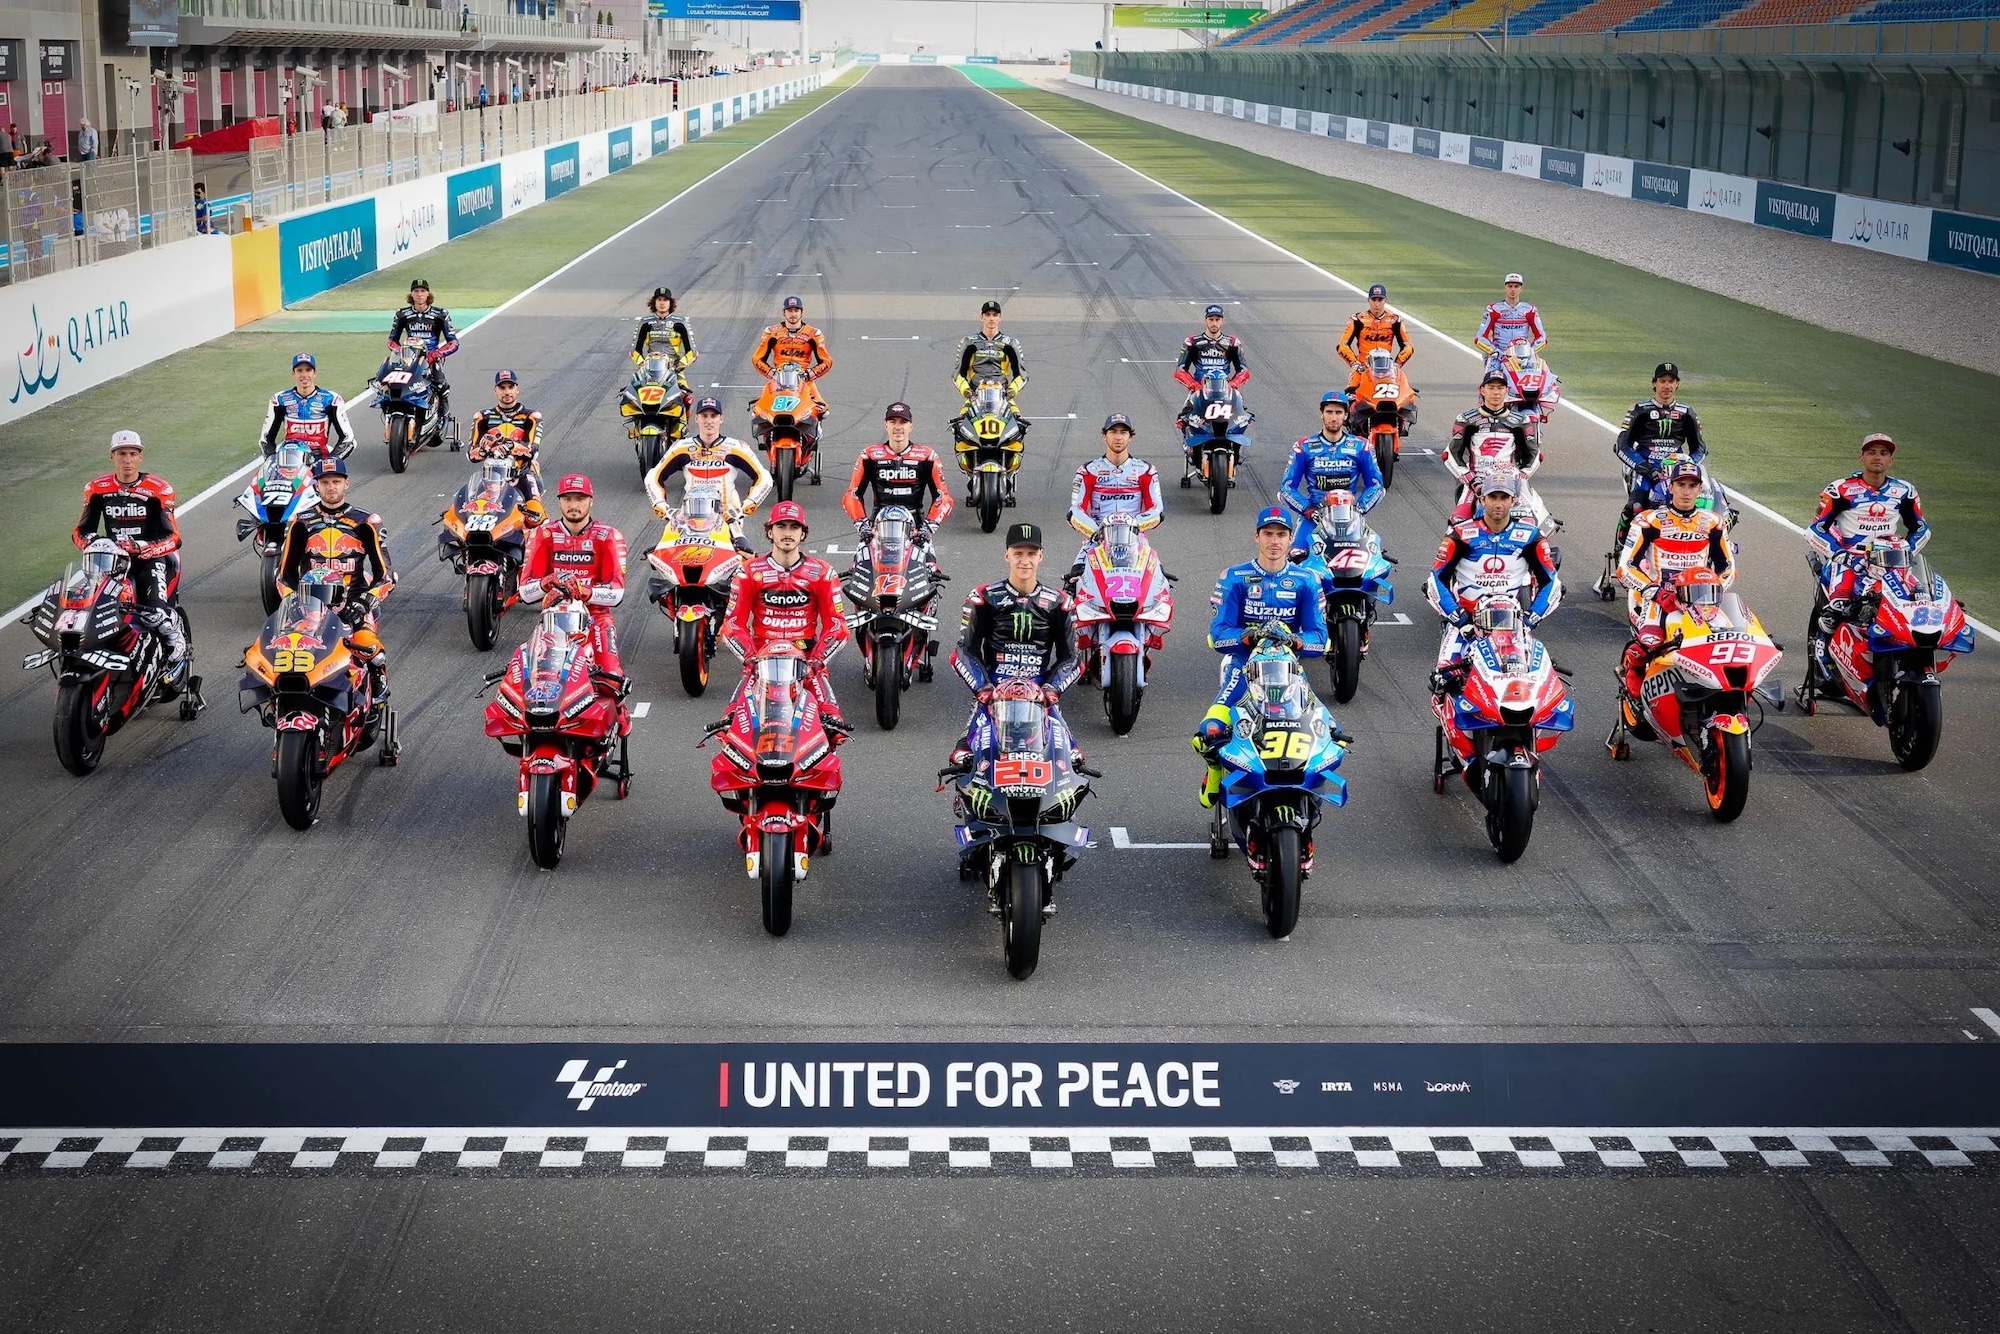 MotoGP's lineup of riders. Media sourced from Asphalt & Rubber.